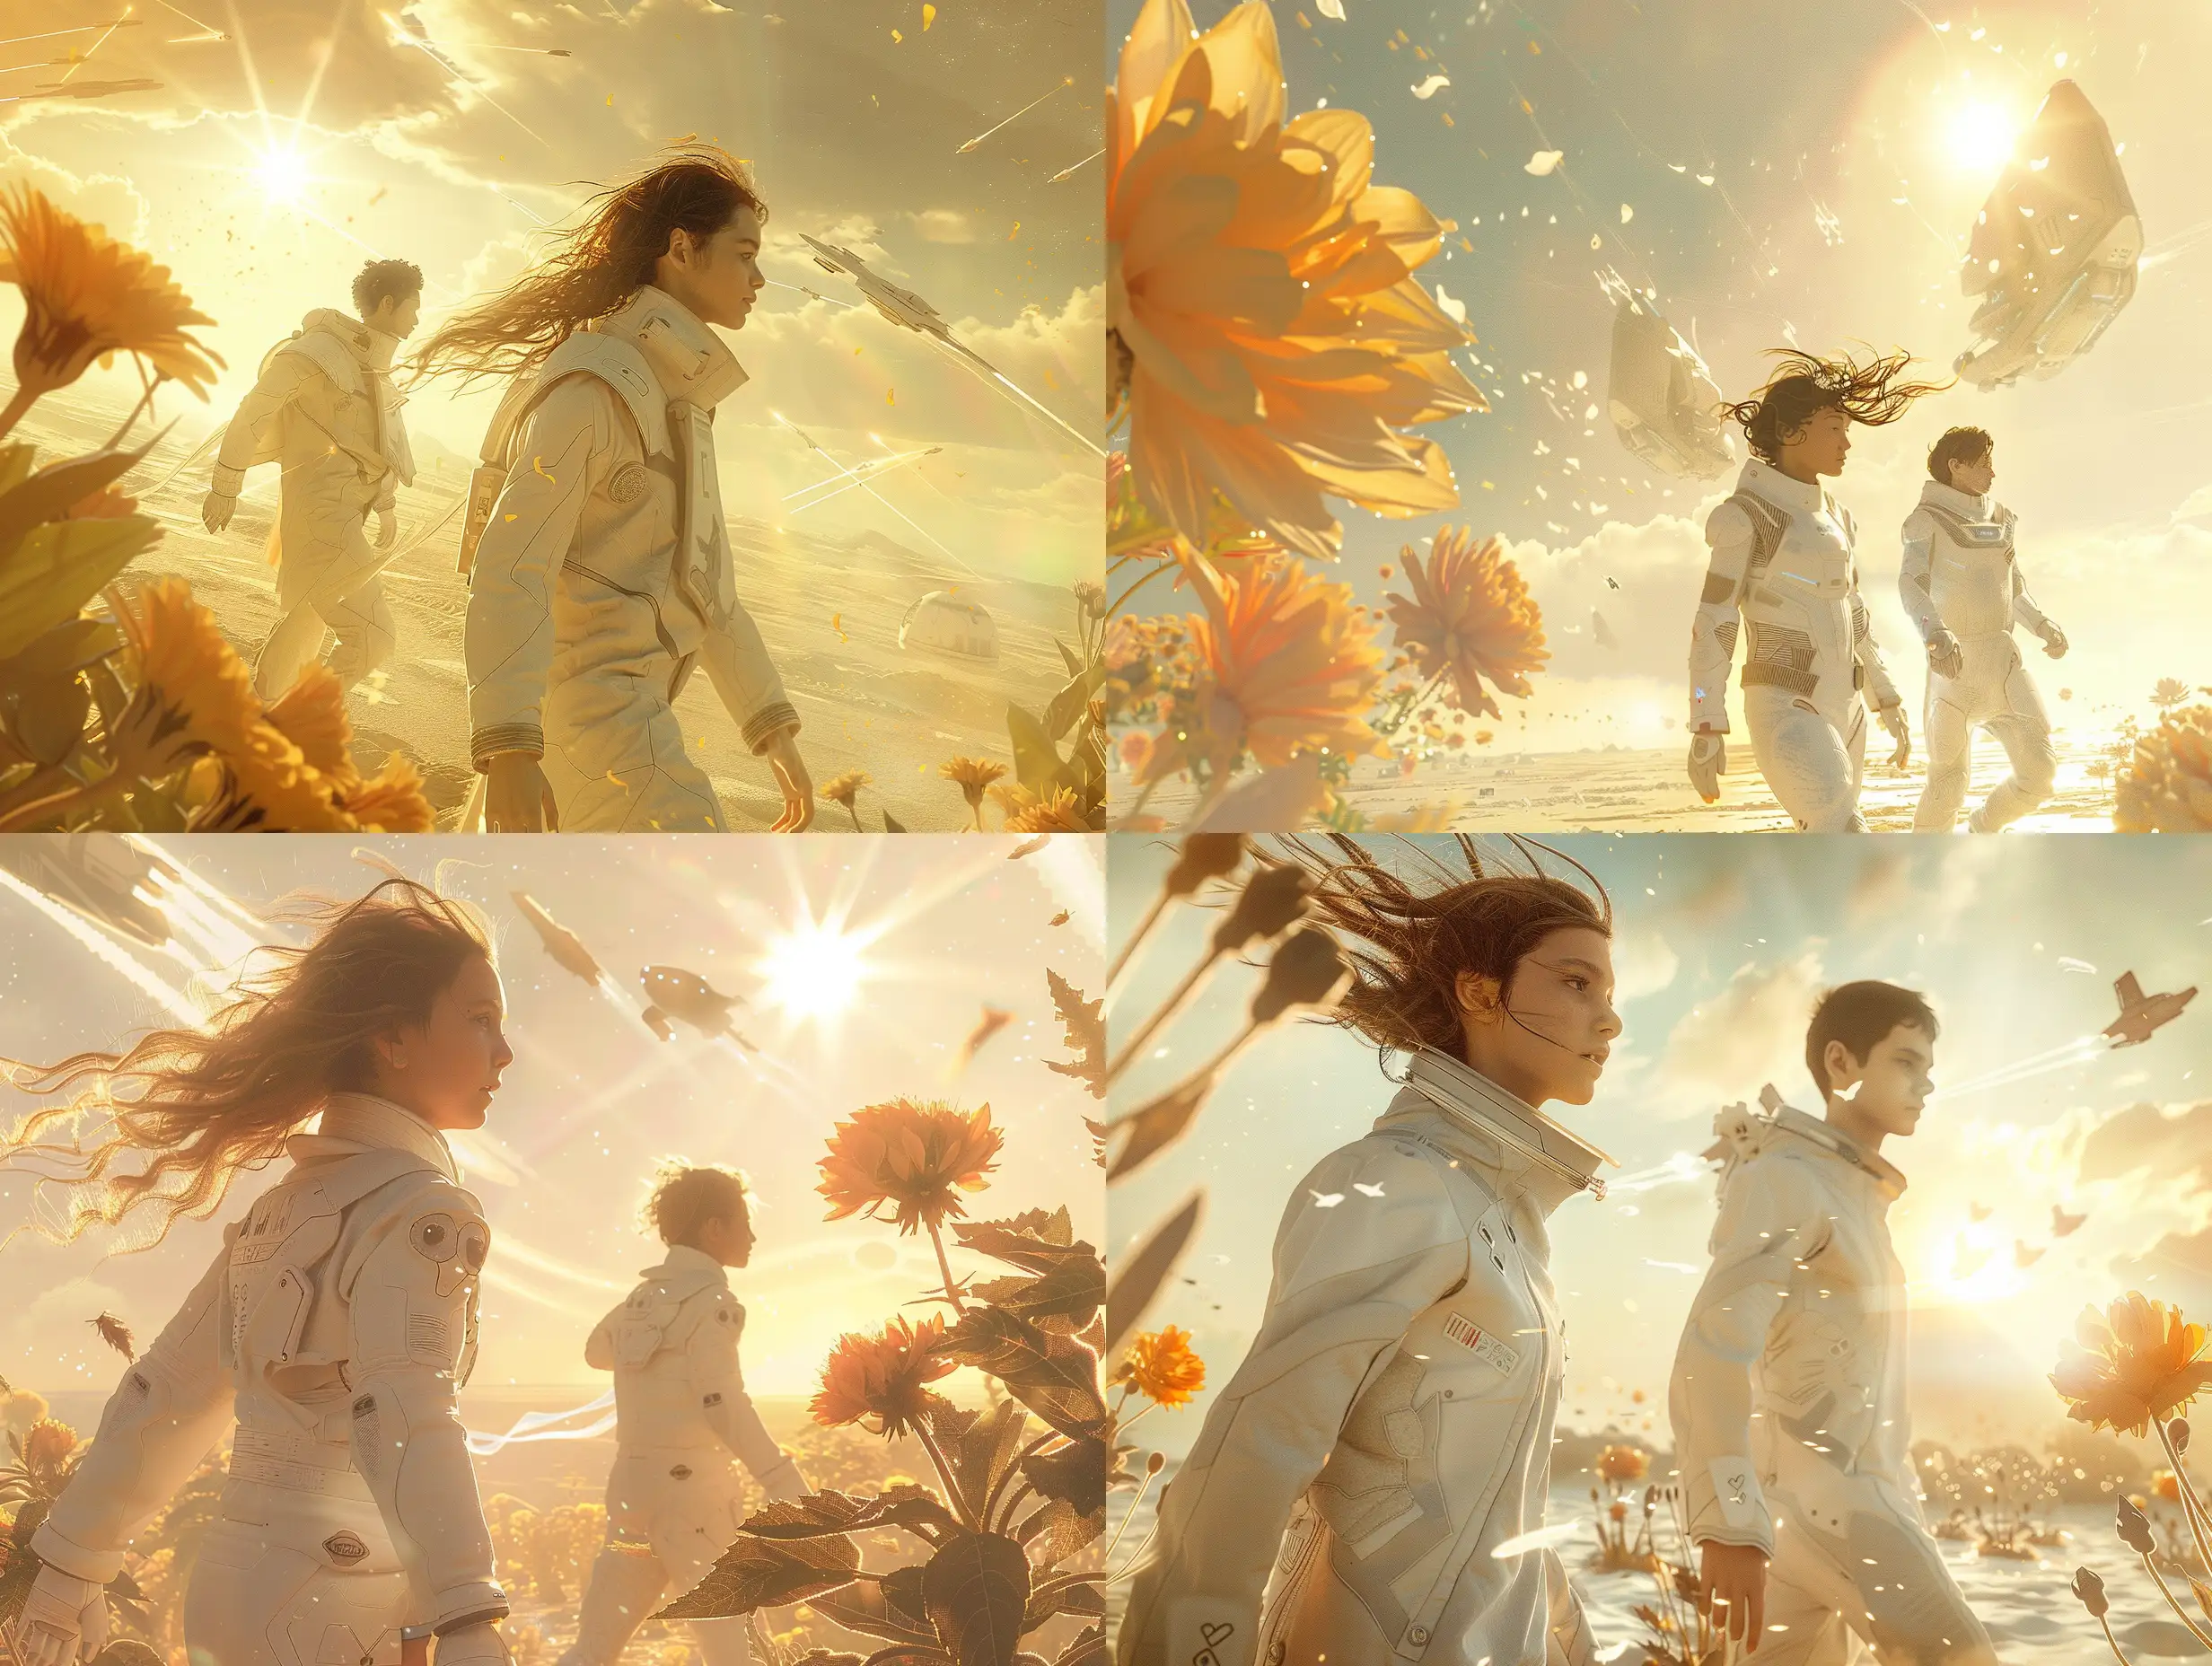 Exploring-Alien-Worlds-Astronauts-in-DuneInspired-Suits-Amidst-Enormous-Flora-and-Spaceships